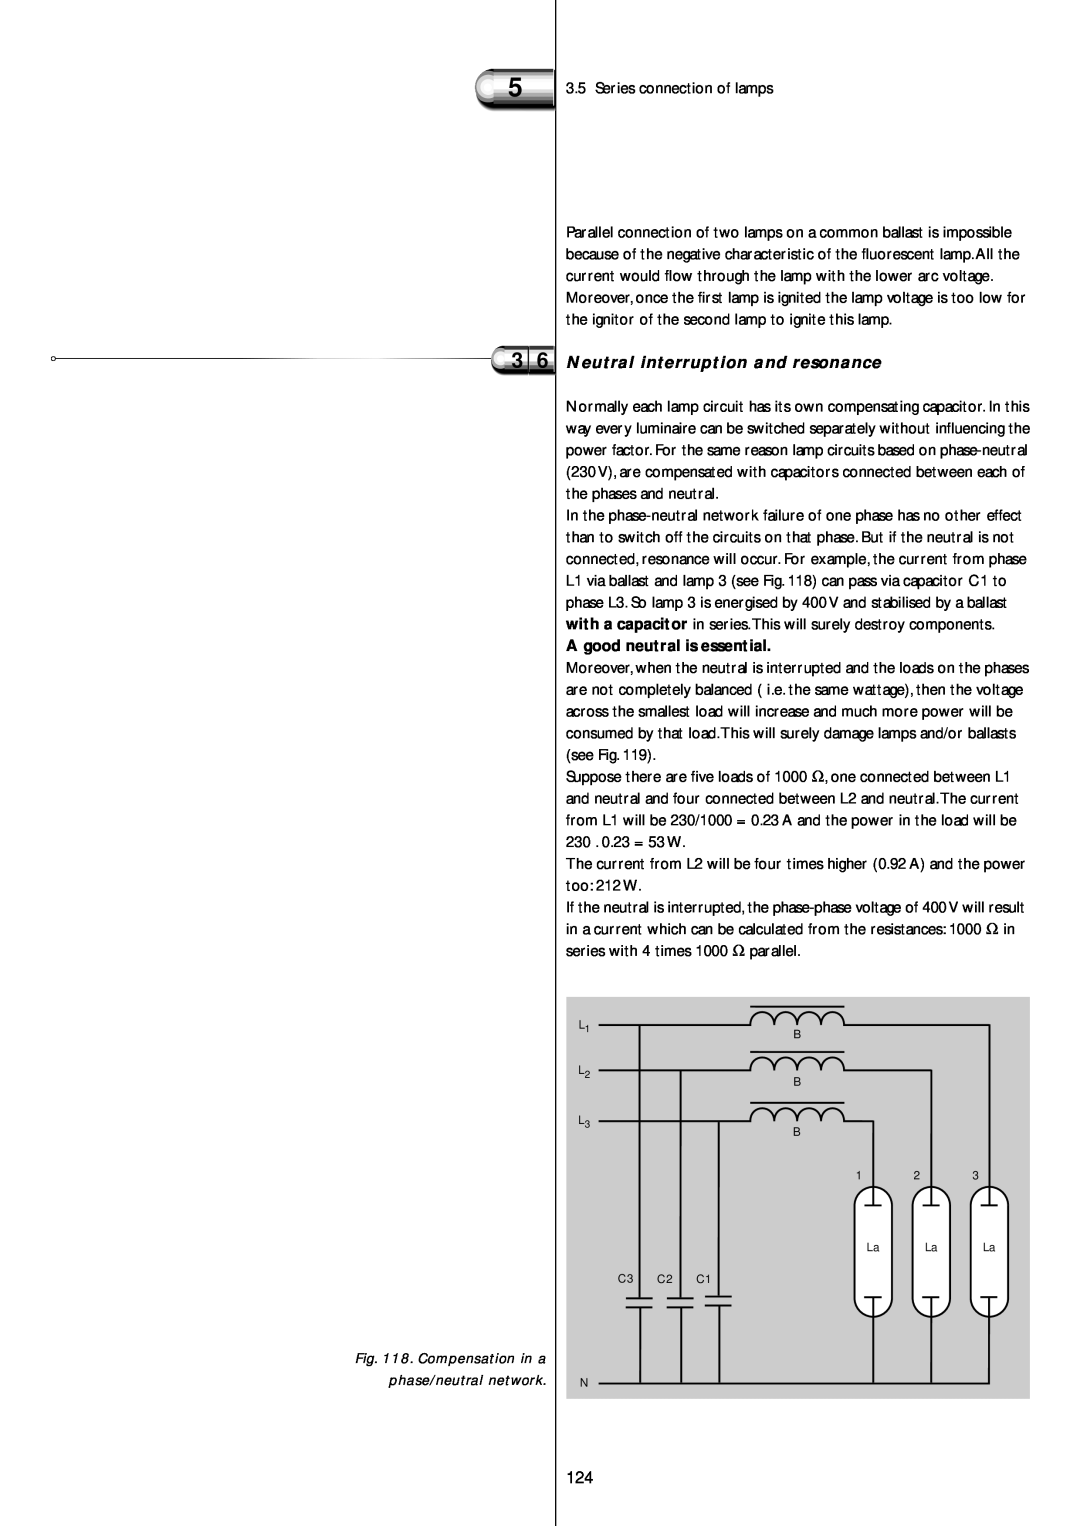 Philips Electromagnetic Lamp manual 3 6 Neutral interruption and resonance, A good neutral is essential 